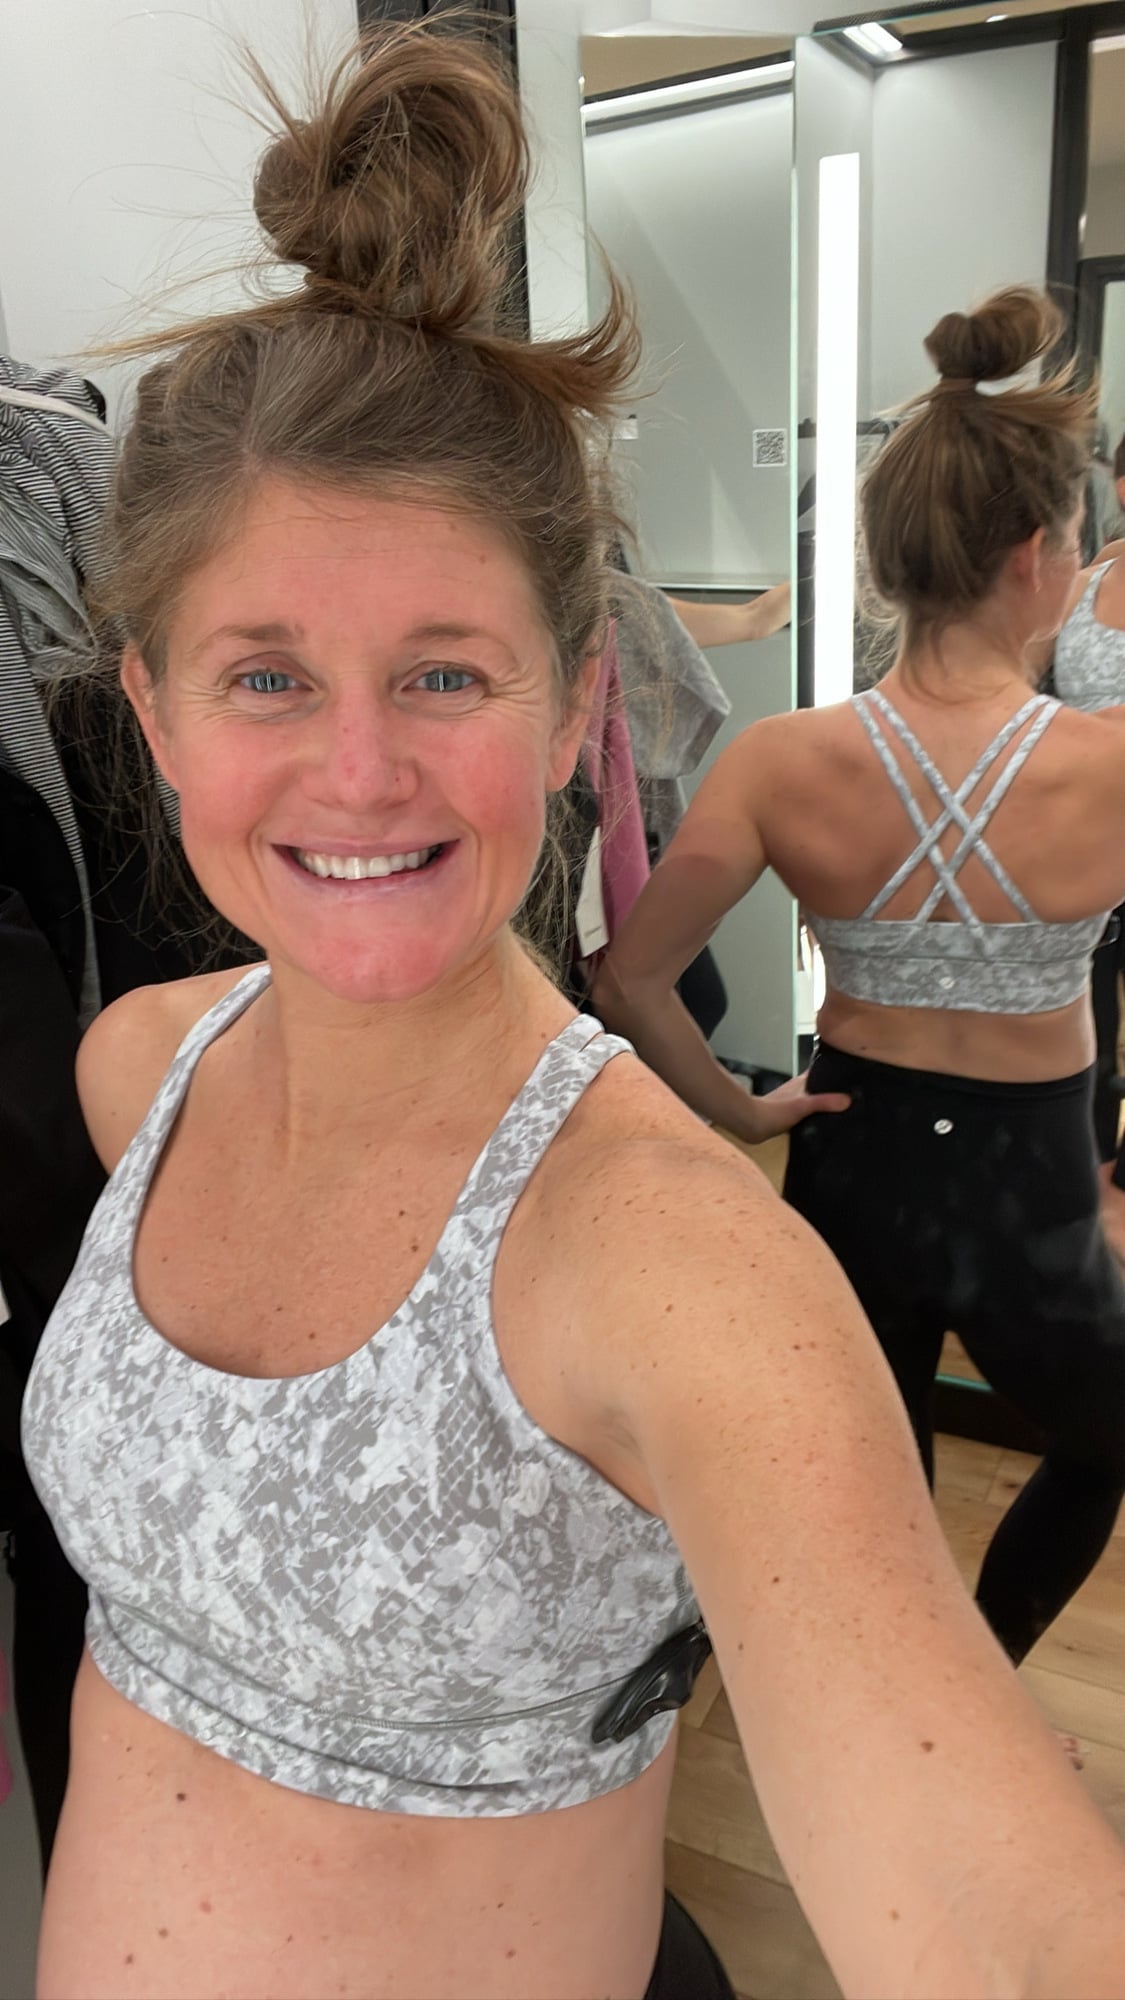 Woman taking picture of herself wearing Energy bra from front and back